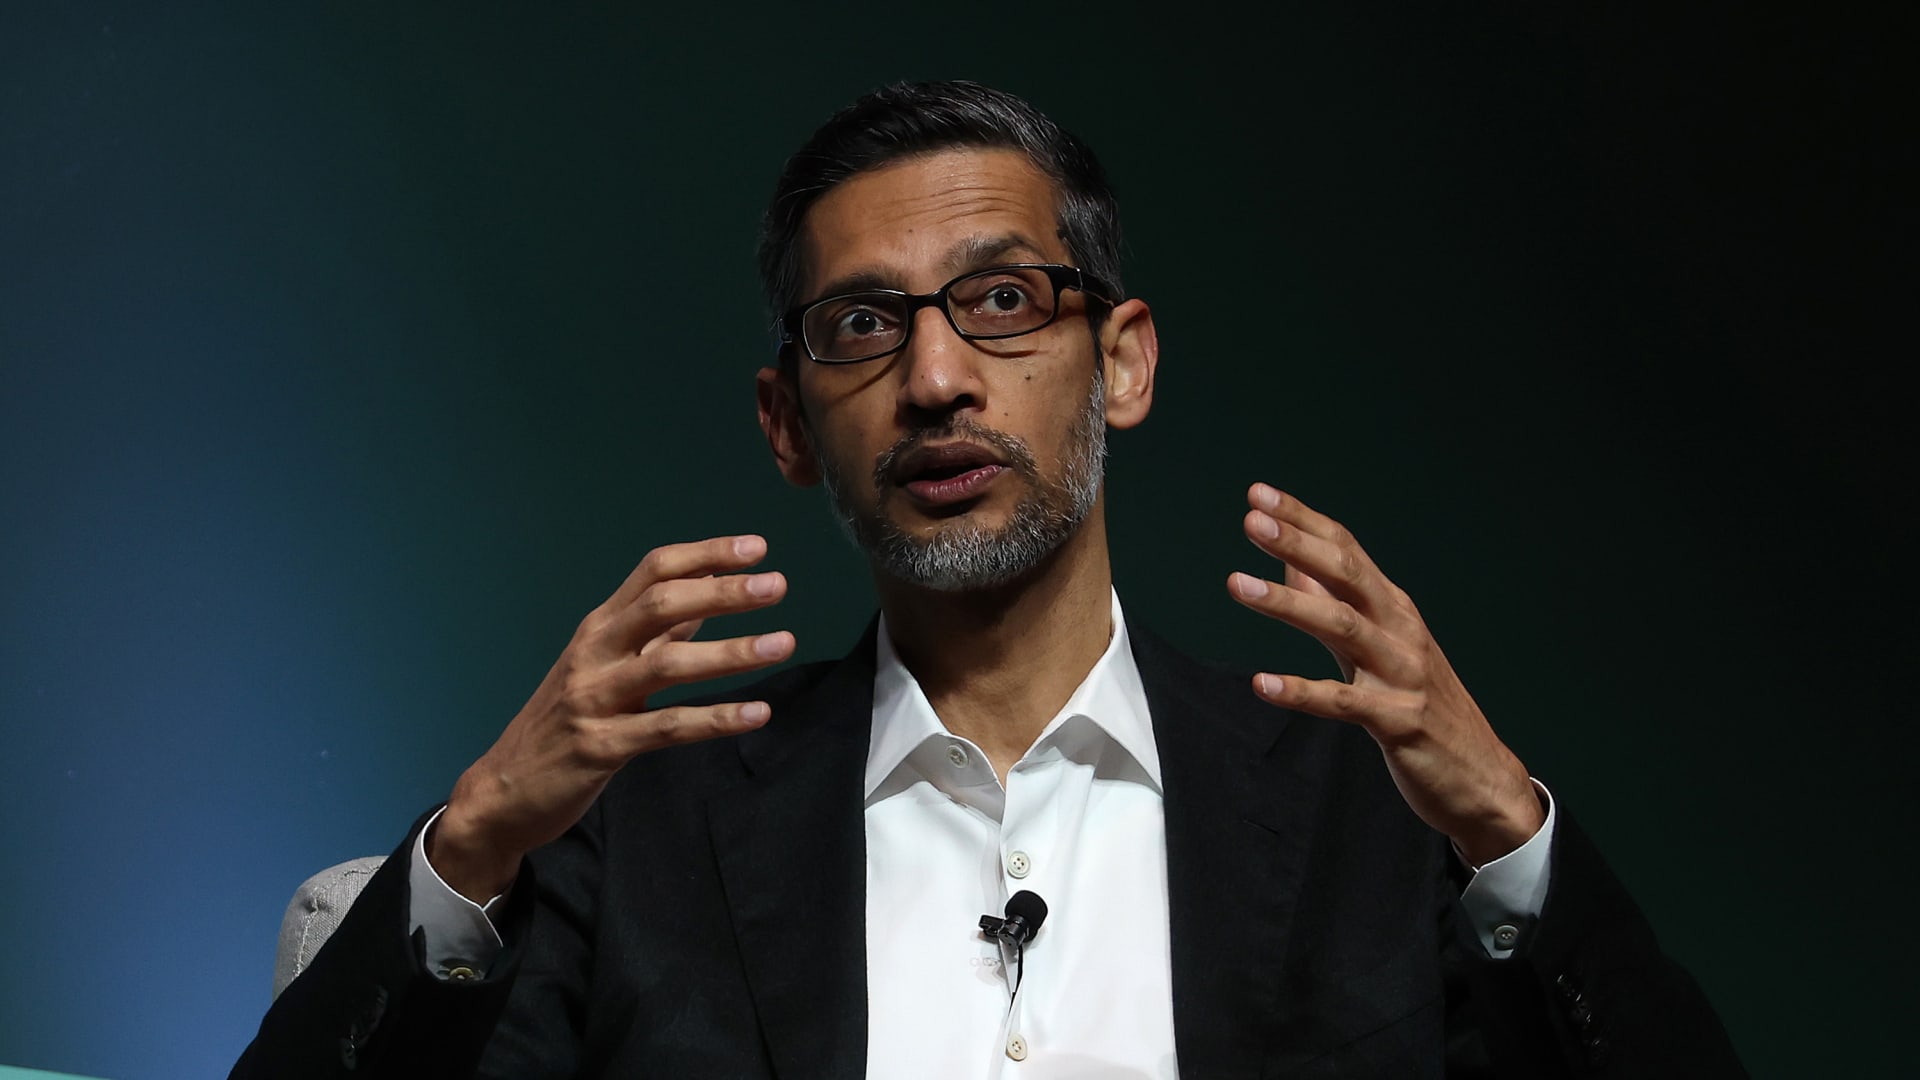 Google lays off hundreds of 'Core' employees, moves some positions to India and Mexico